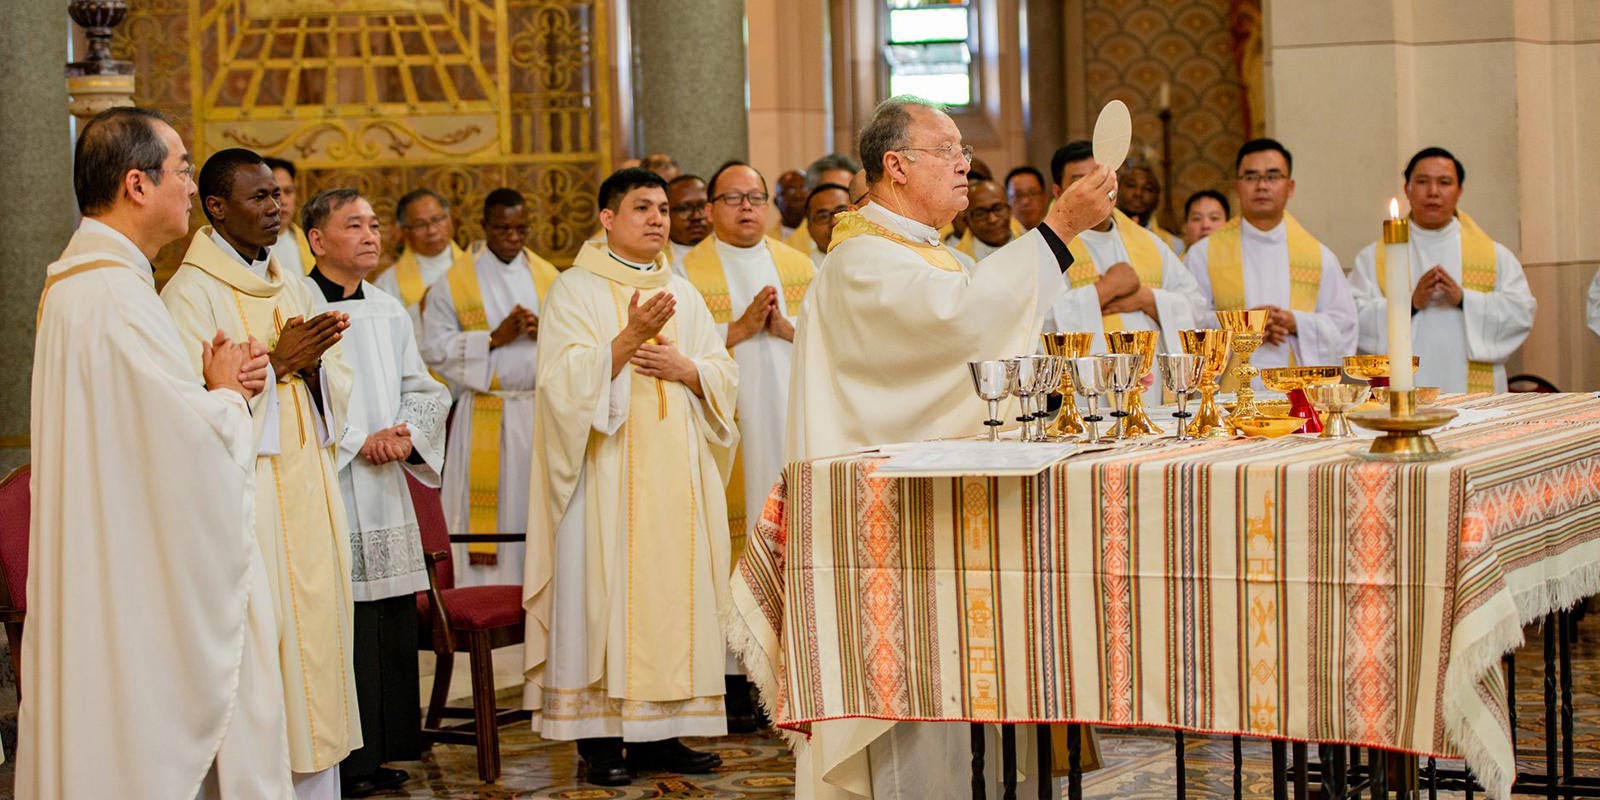 Priests of the Society of the Divine Word celebrate mass in Techny, Illinois